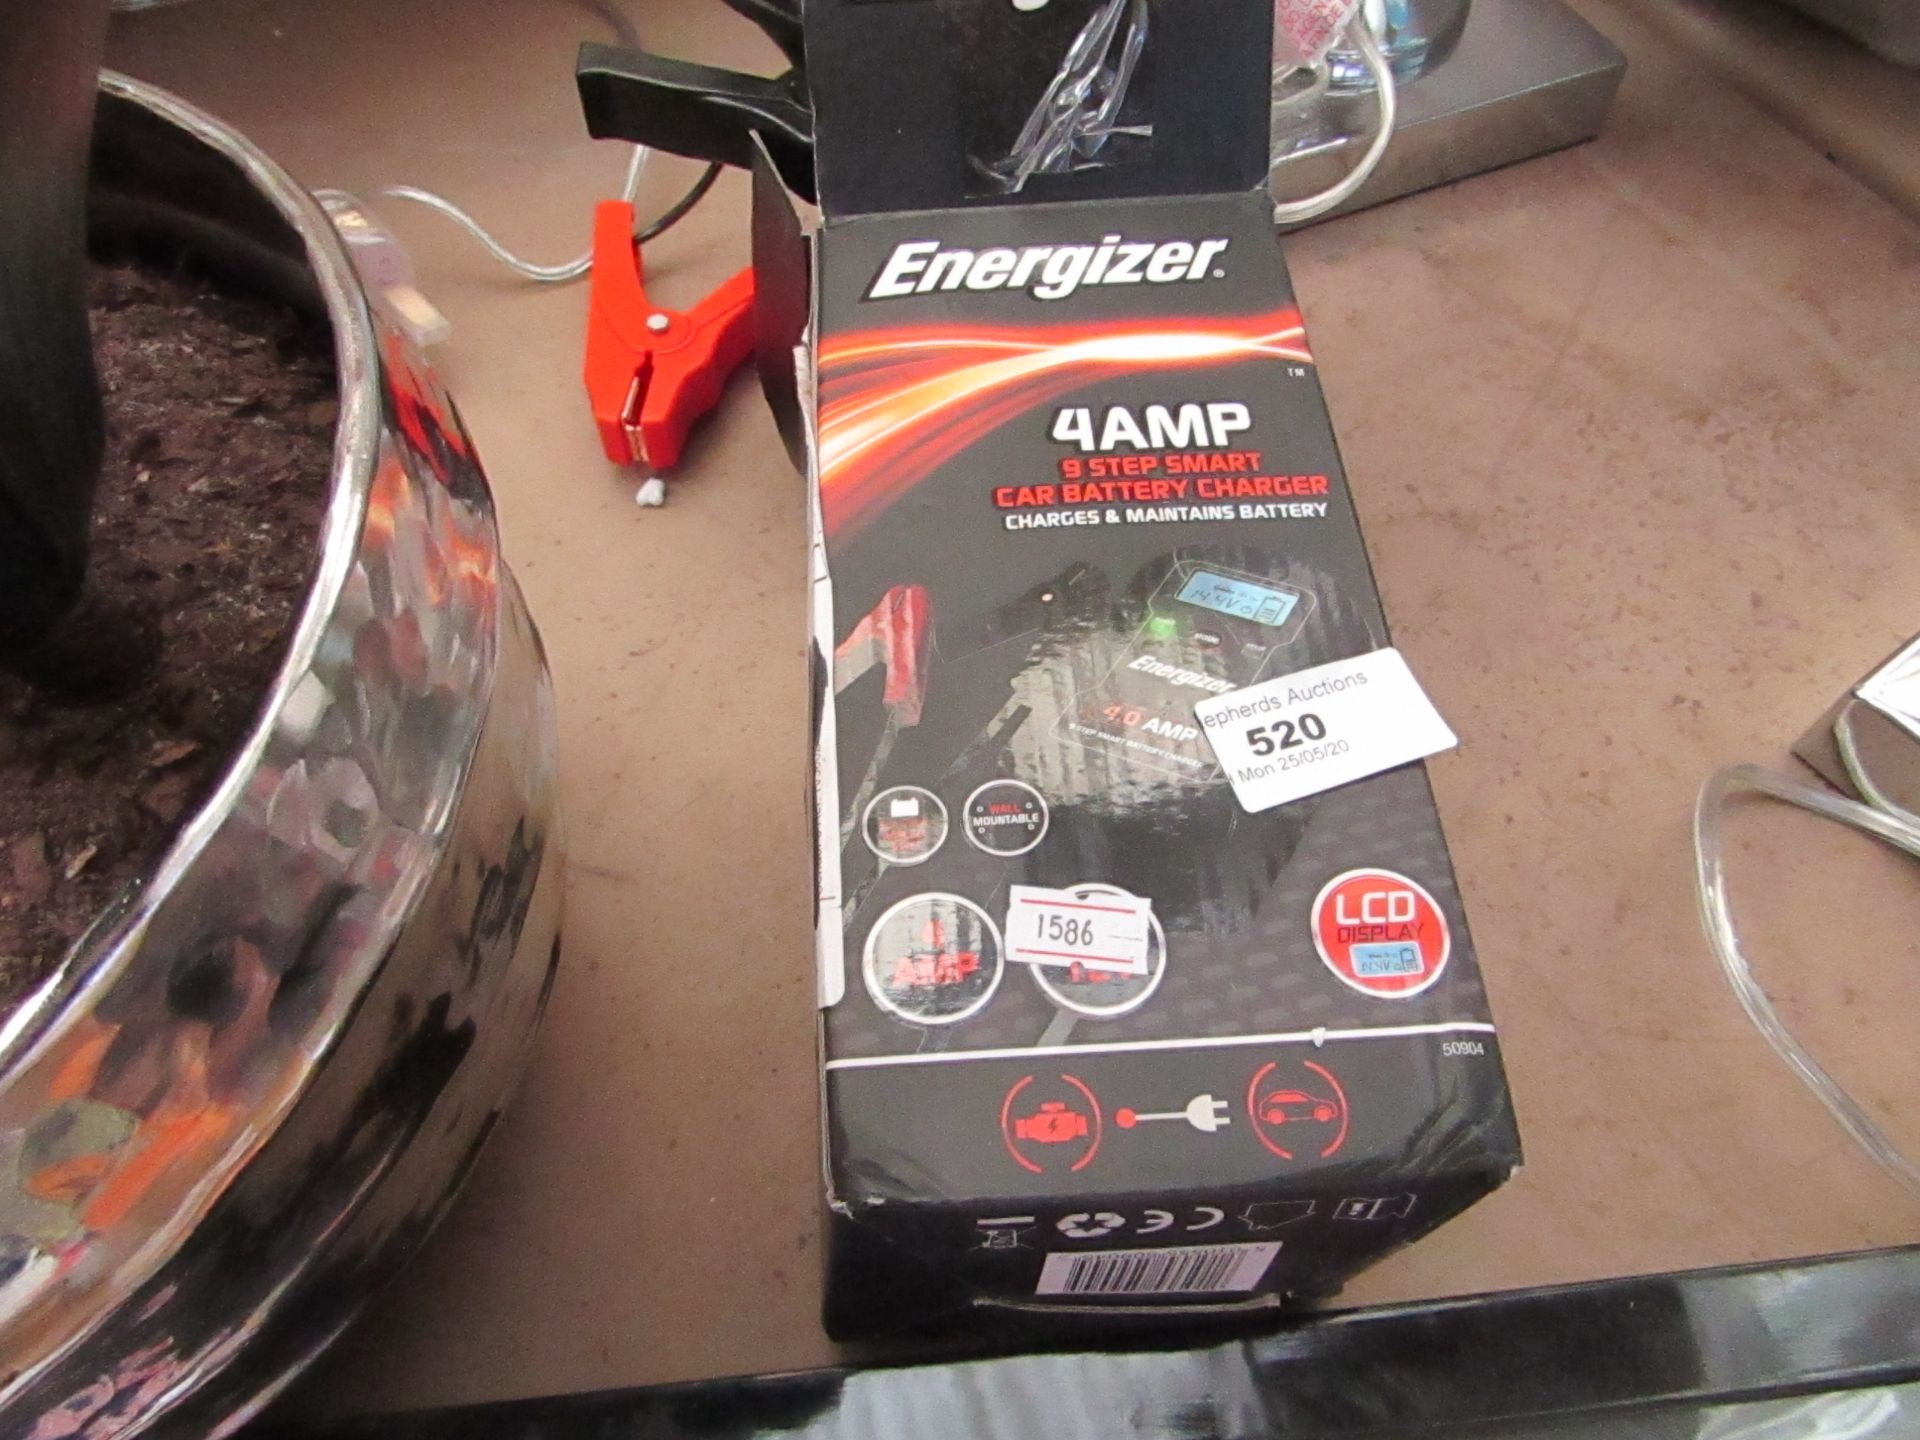 Energizer 4 Amp 9 Step Smart Car Battery Charger. Boxed but untested